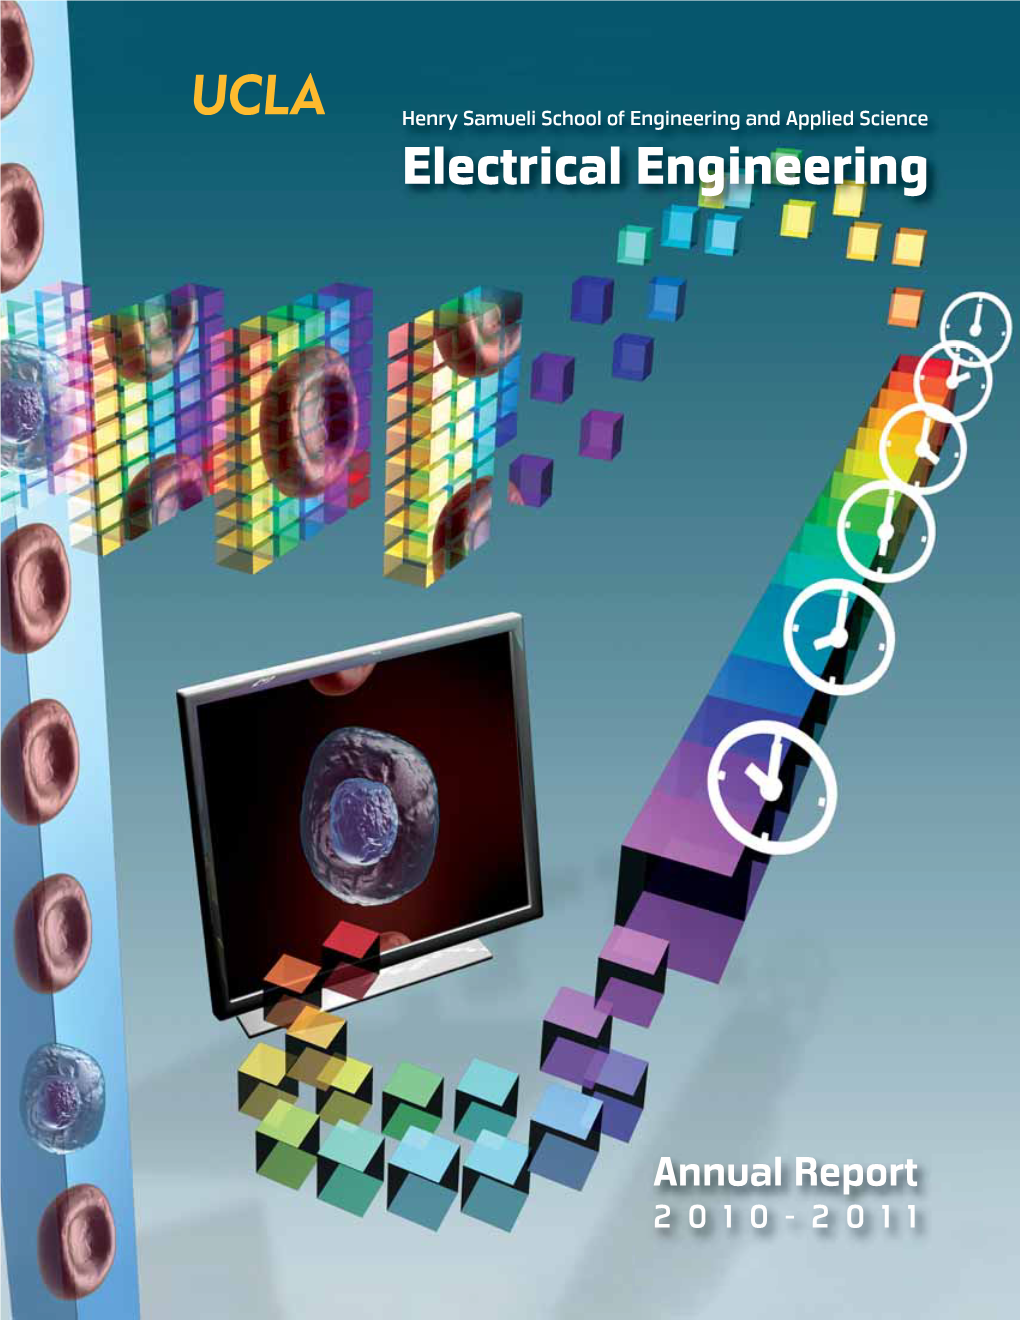 2010-2011 Annual Report 2010-2011 Electrical Engineering